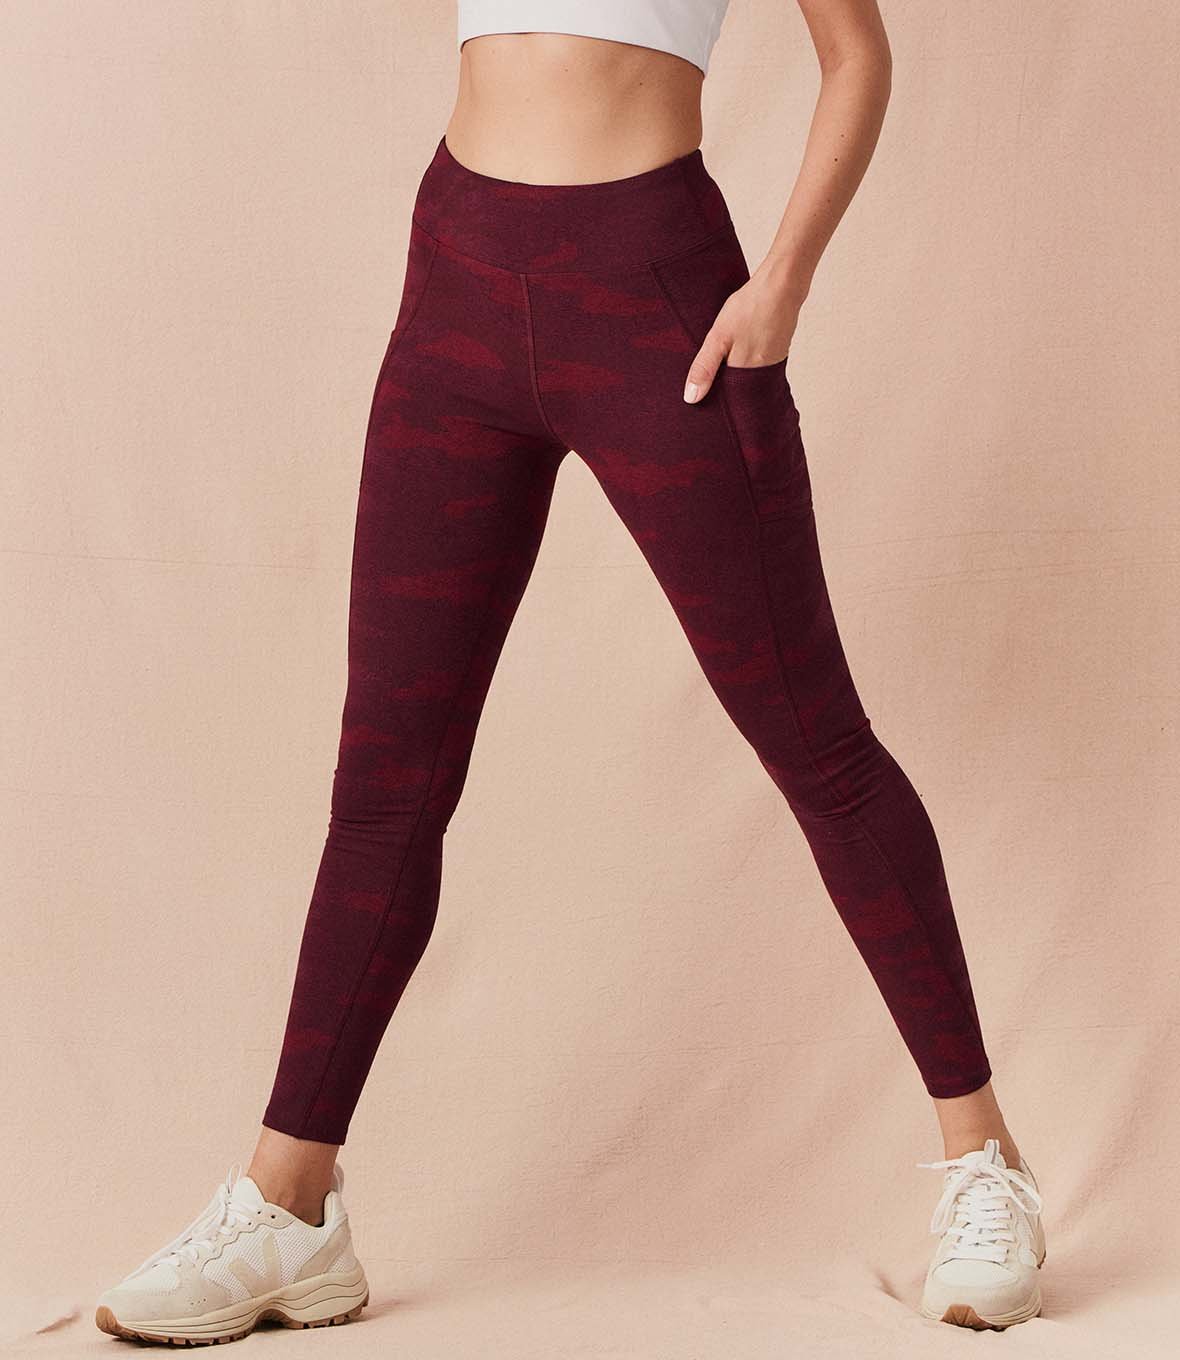 Women's Clearance Purefit Crossover Legging made with Organic